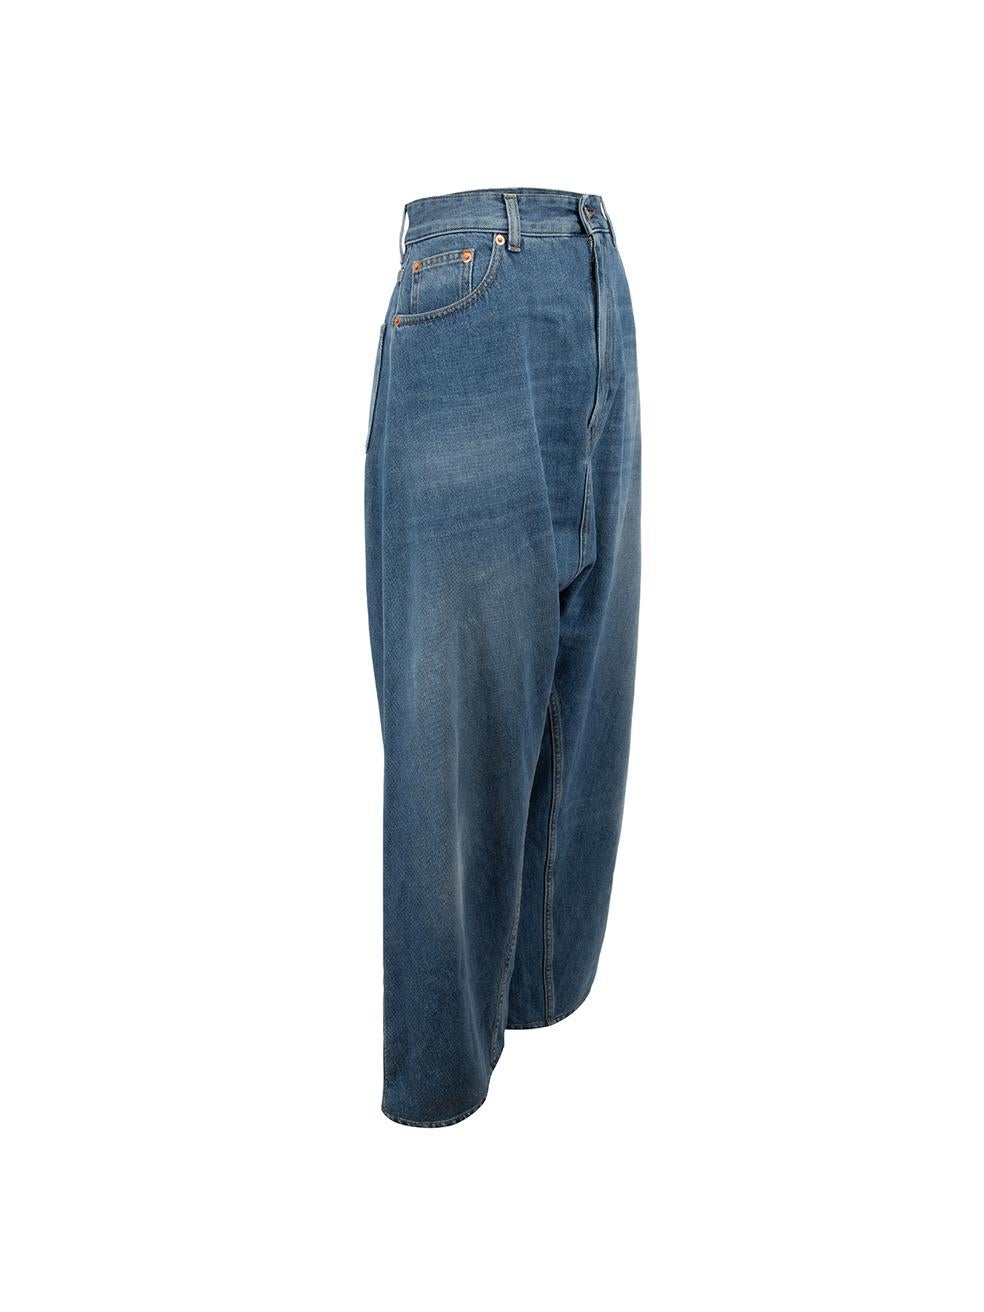 CONDITION is Very good. Hardly any visible wear to jeans is evident on this used MM6 Maison Margiela designer resale item.



Details


Blue

Denim

Loose fit wide leg jeans

Drop crotch

Cropped length

High rise

Front zip closure with